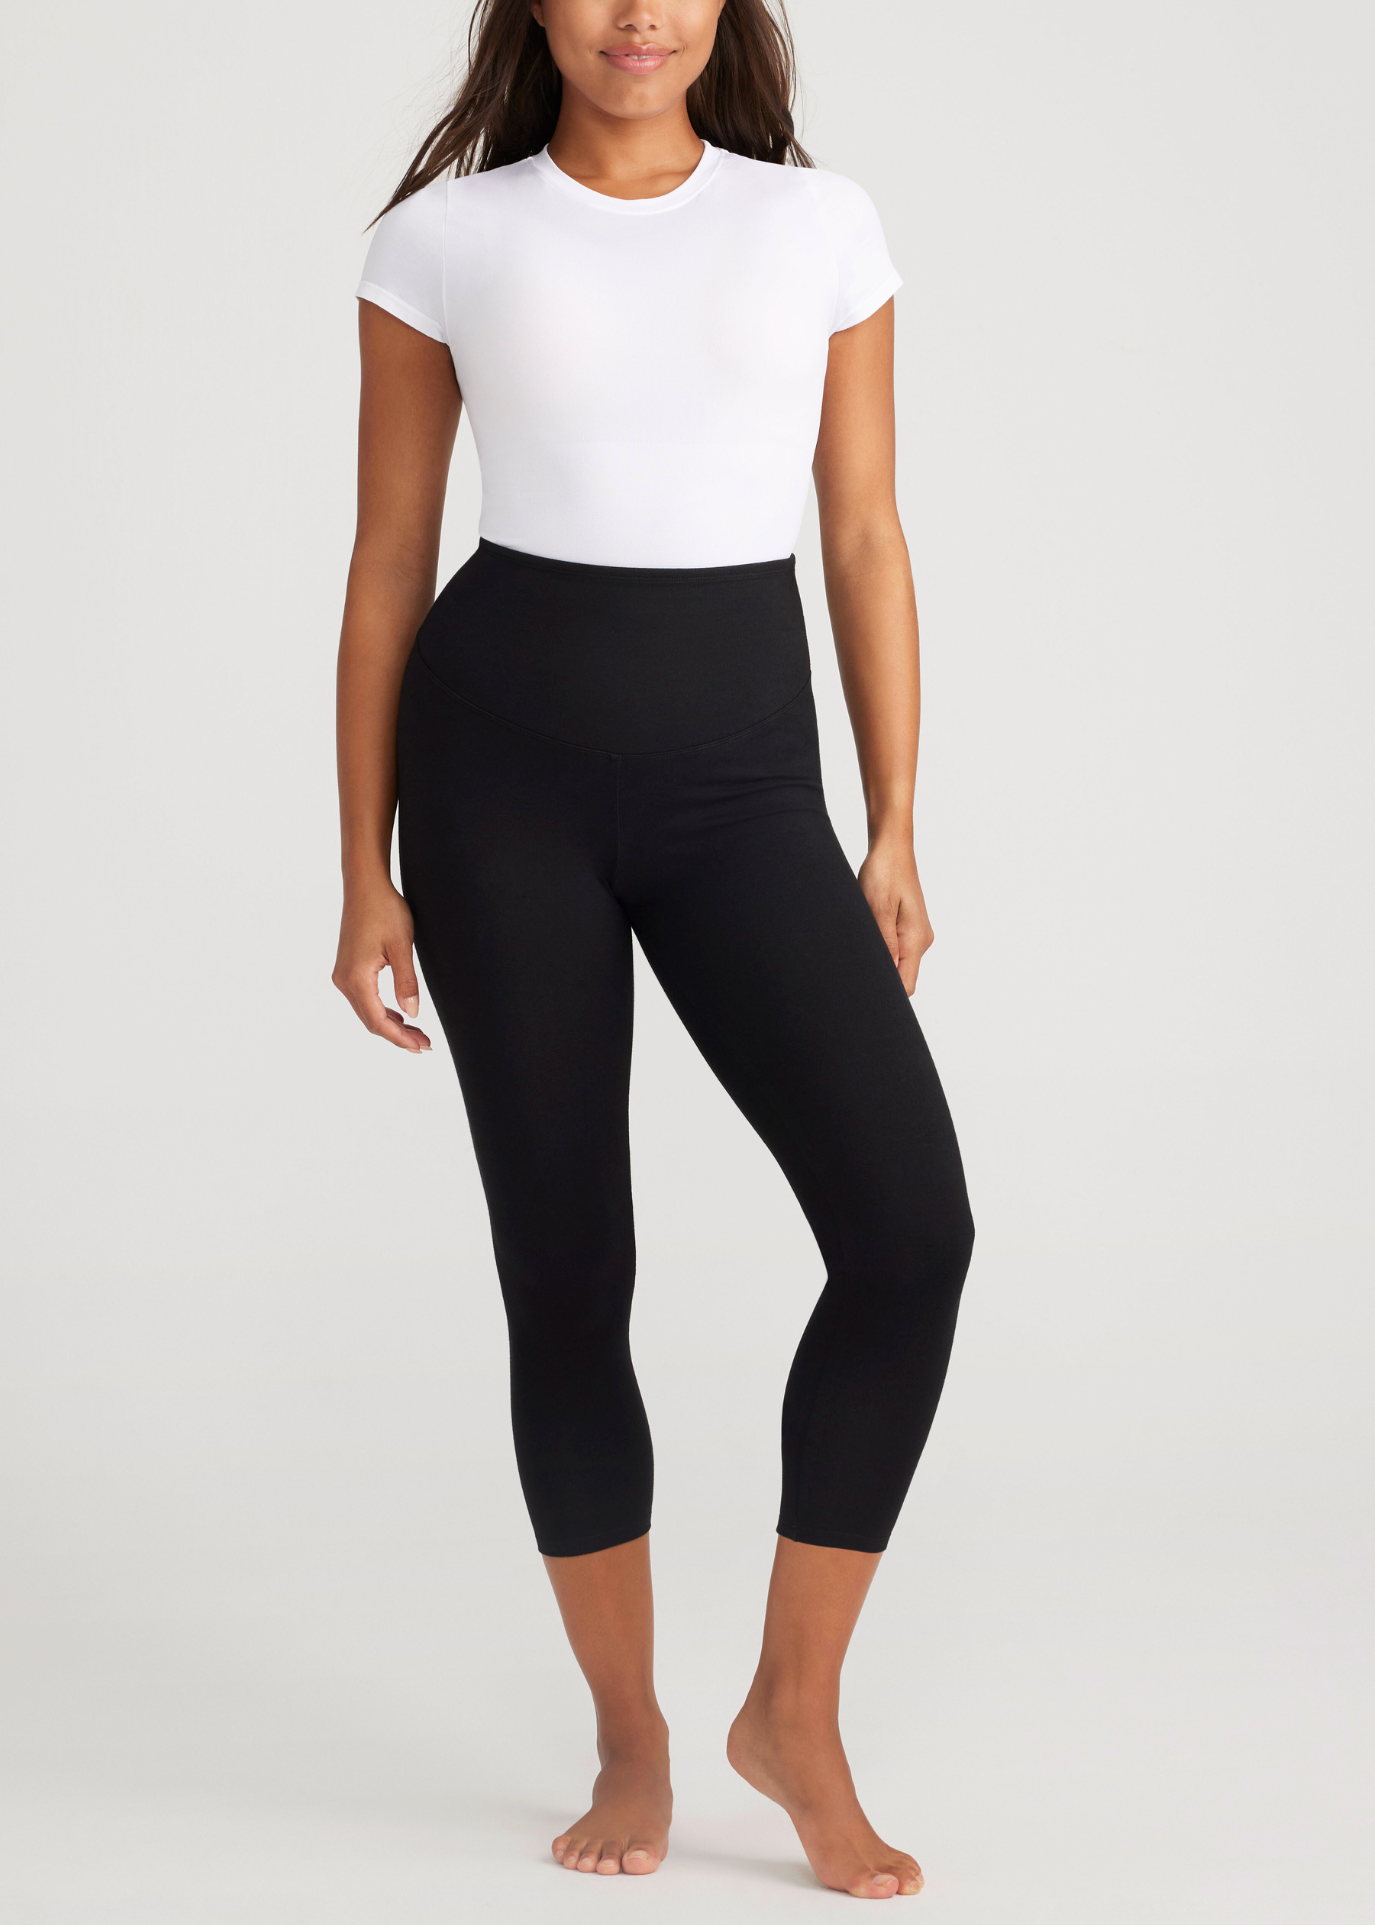 Yummie Tummie High Waist Tummy Seamless Shaping Legging Size Small NWT -  $28 New With Tags - From Shelby